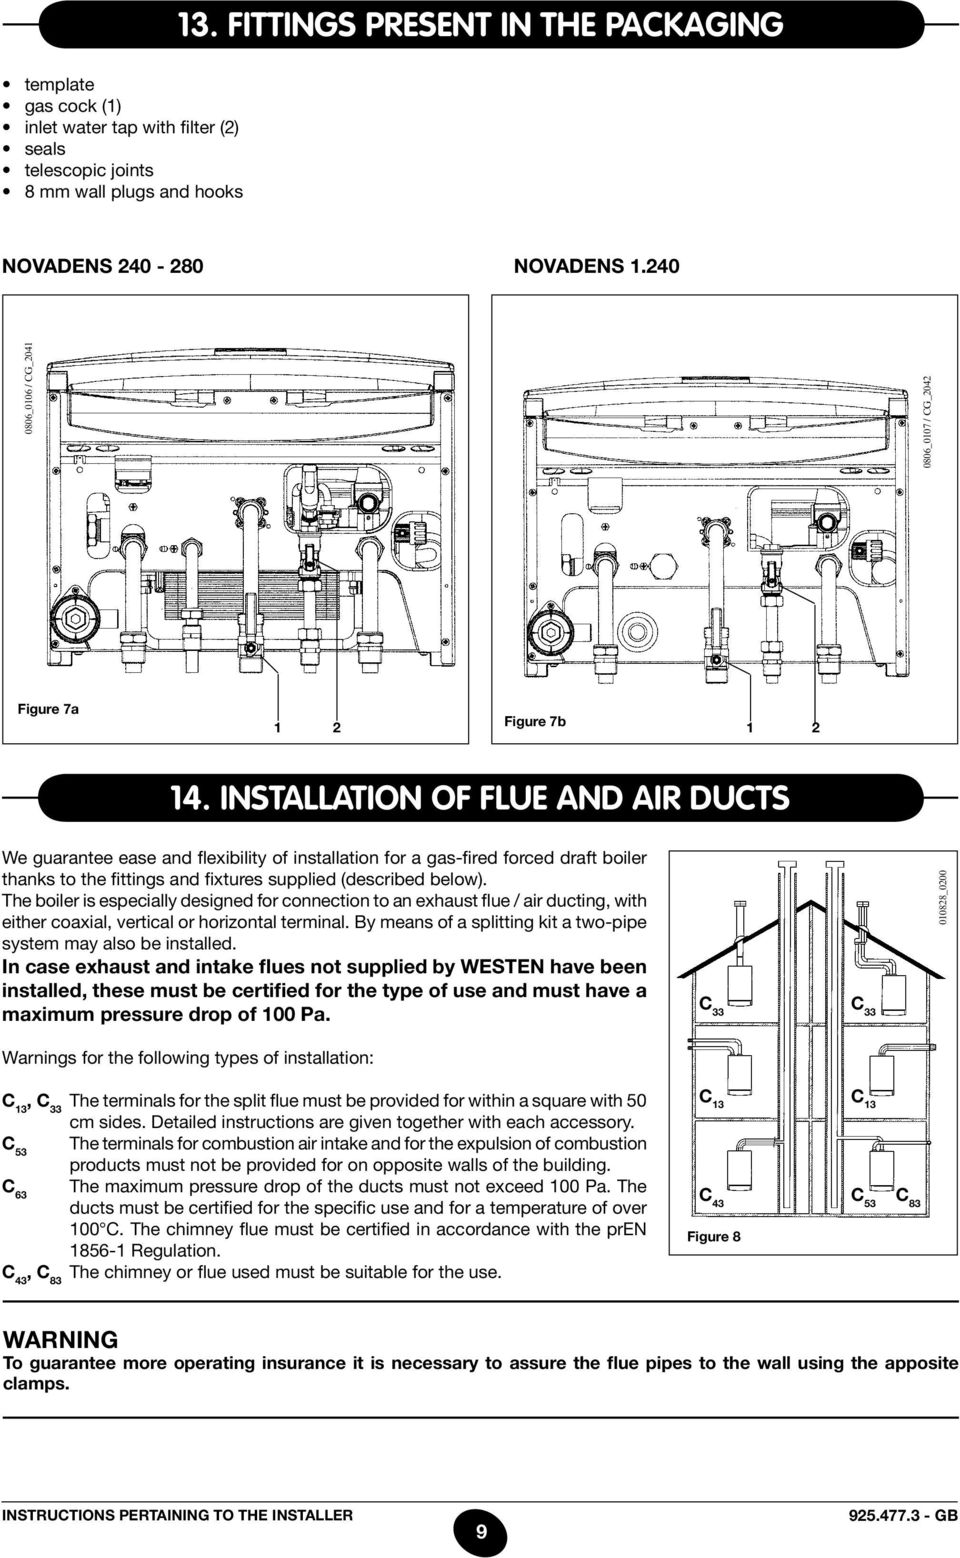 INSTALLAtion of flue and air ducts We guarantee ease and flexibility of installation for a gas-fired forced draft boiler thanks to the fittings and fixtures supplied (described below).